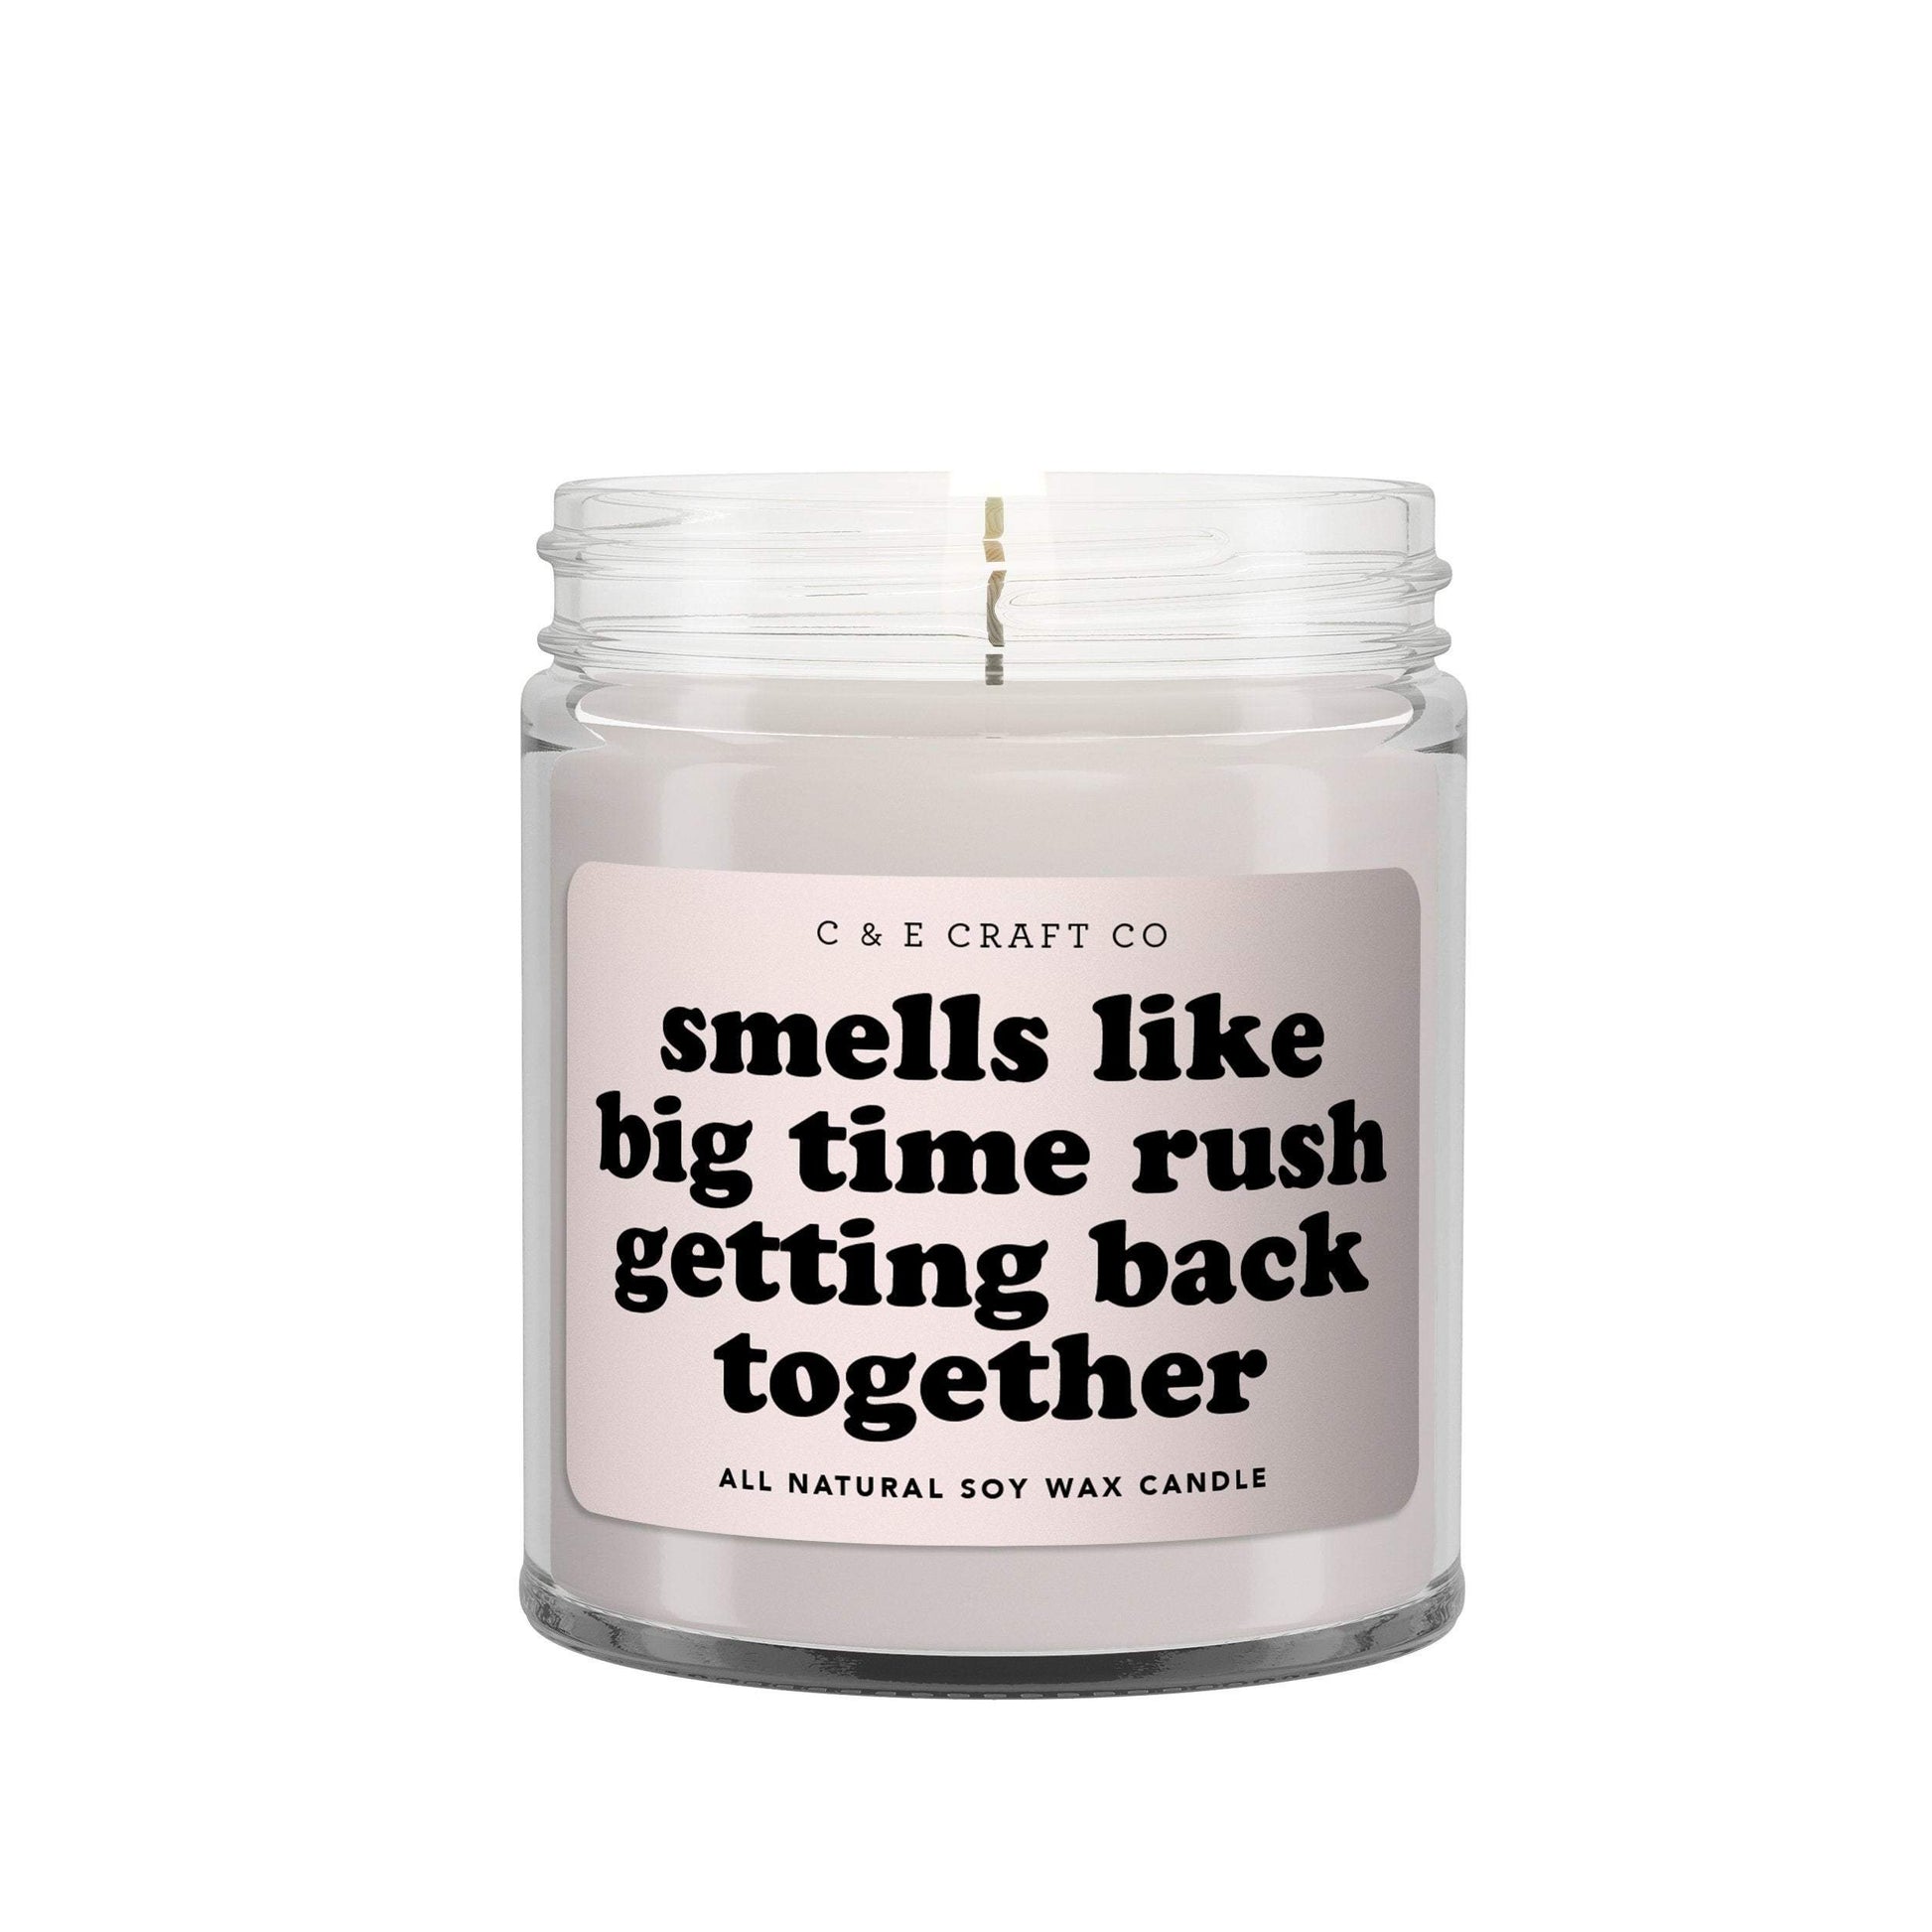 Smells Like Big Time Rush Getting Back Together Candle C & E Craft Co 